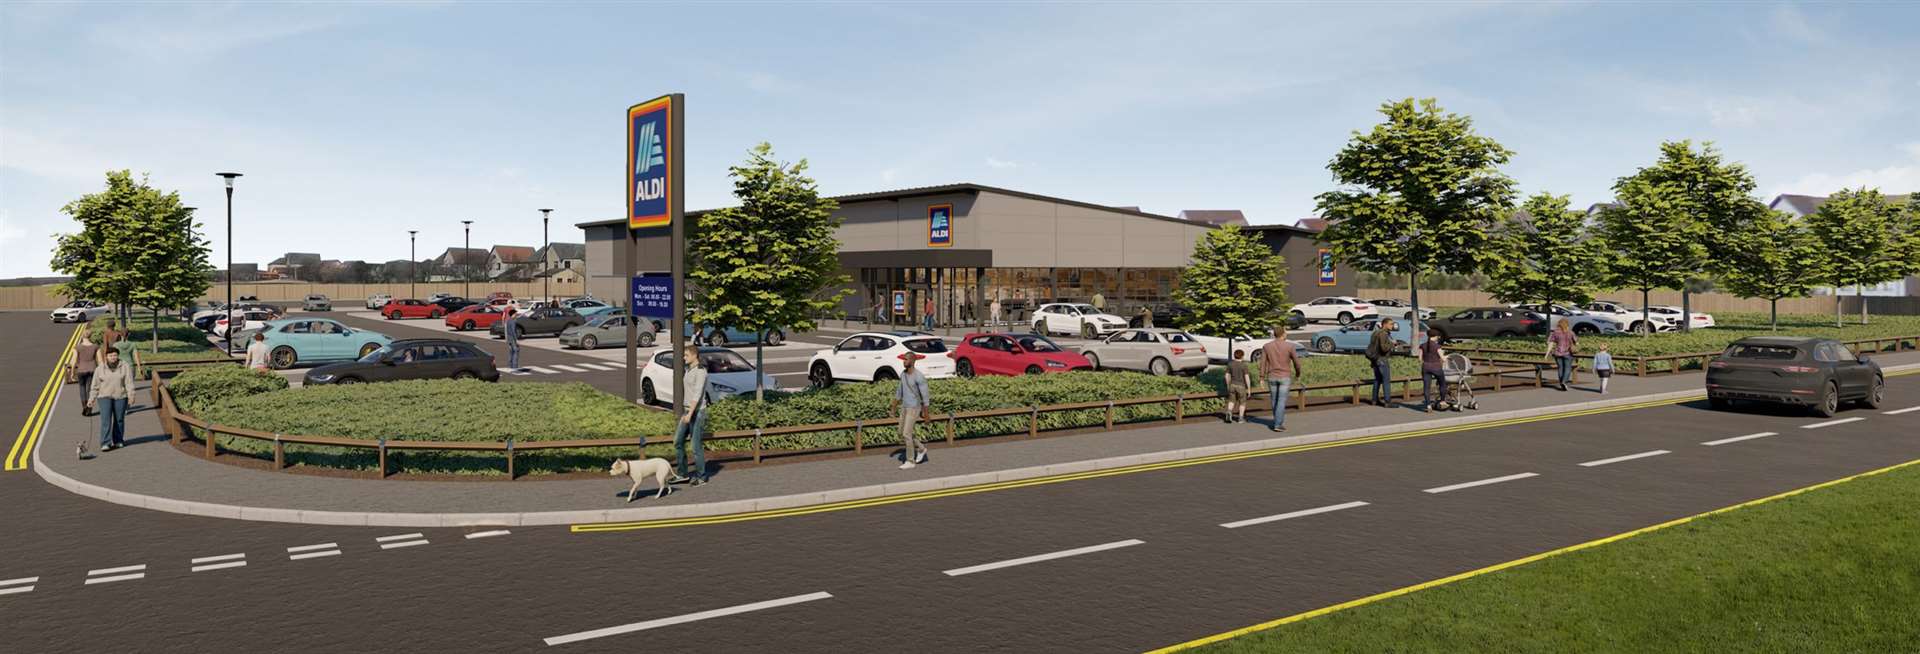 Aldi has confirmed it has resubmitted its planning application to Aberdeenshire Council for its proposed new supermarket in Macduff.